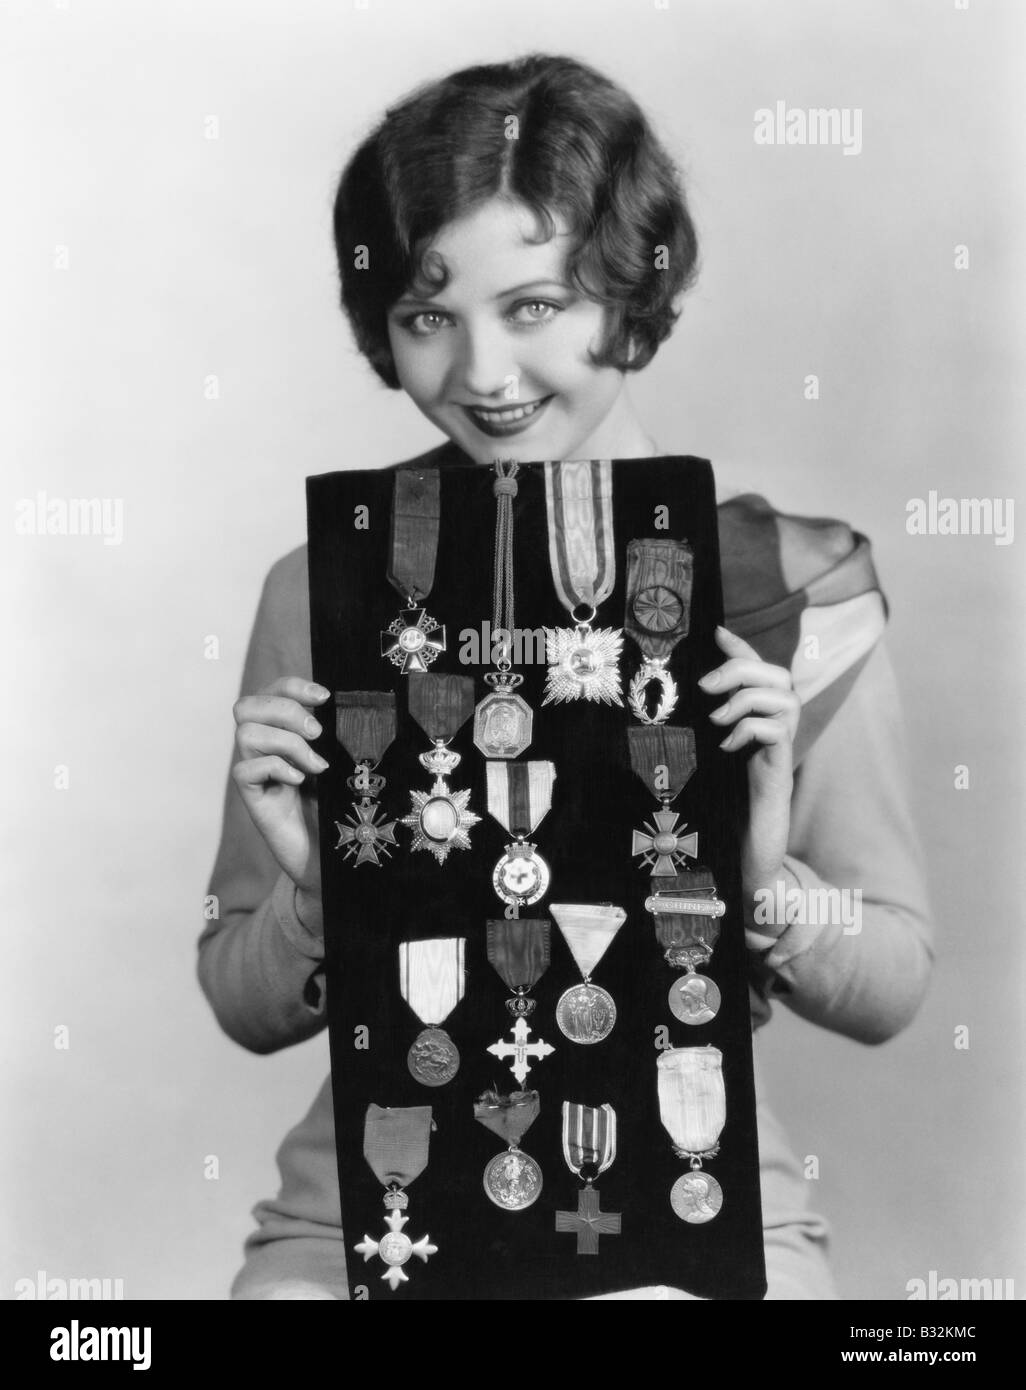 Woman holding display of medals Stock Photo